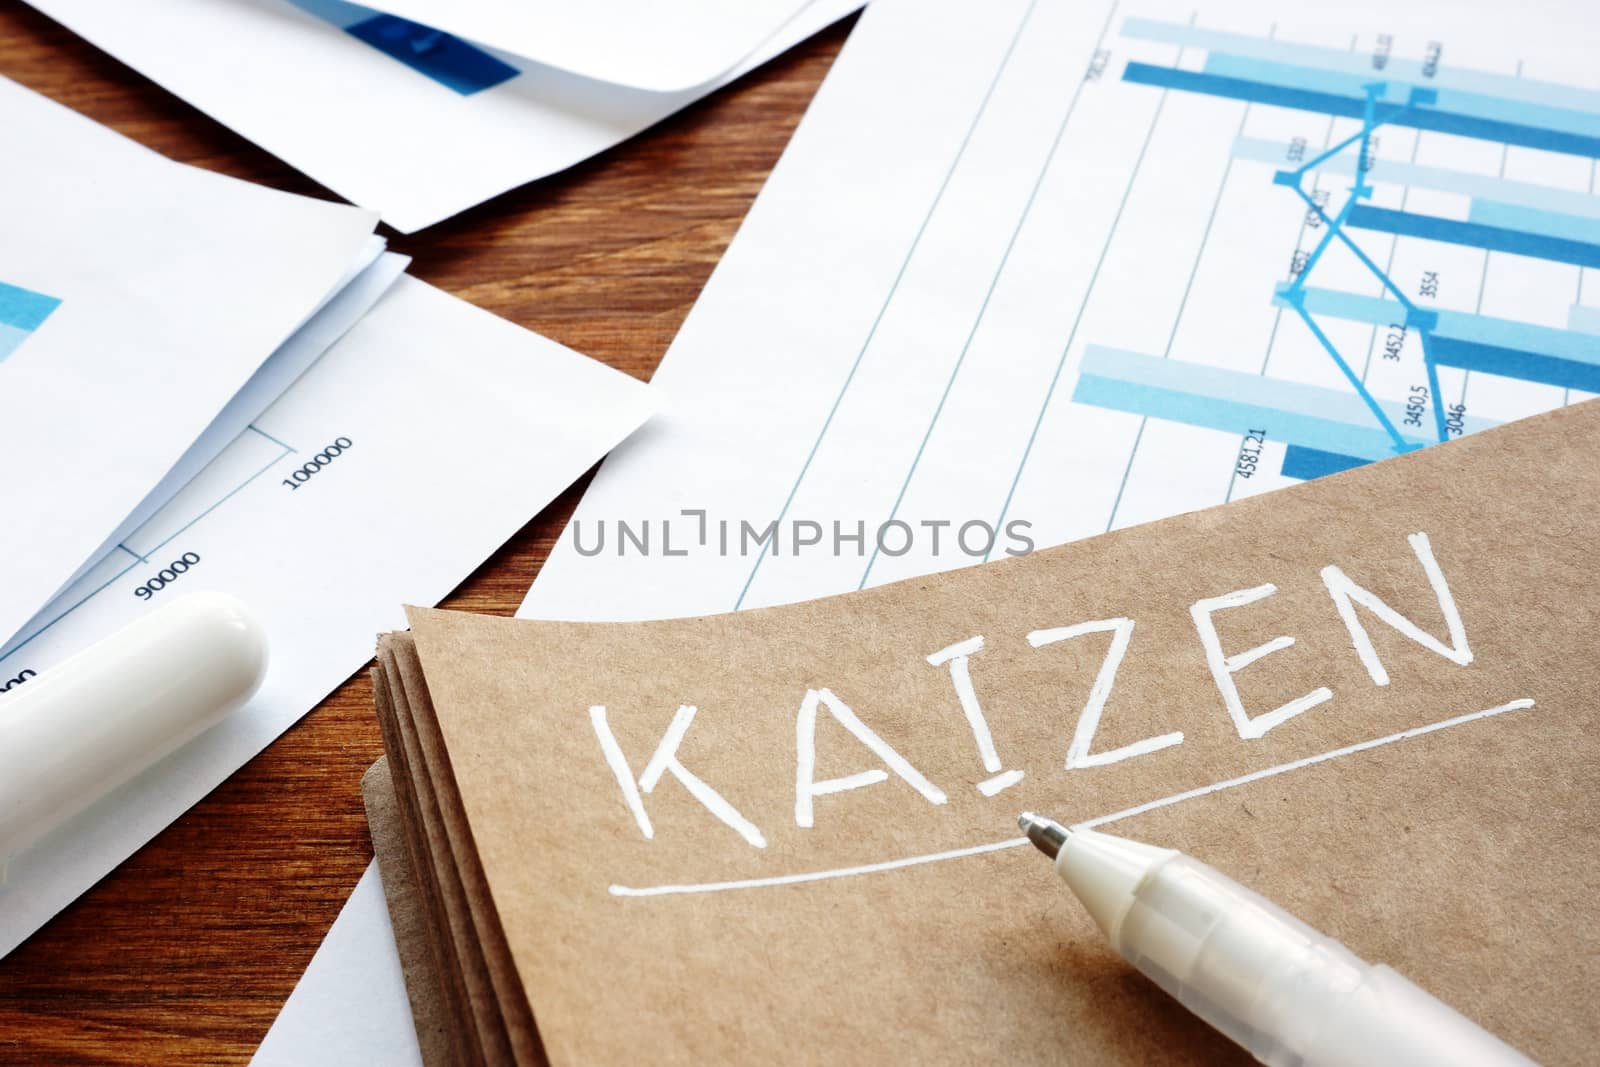 Kaizen sign with business report and charts.